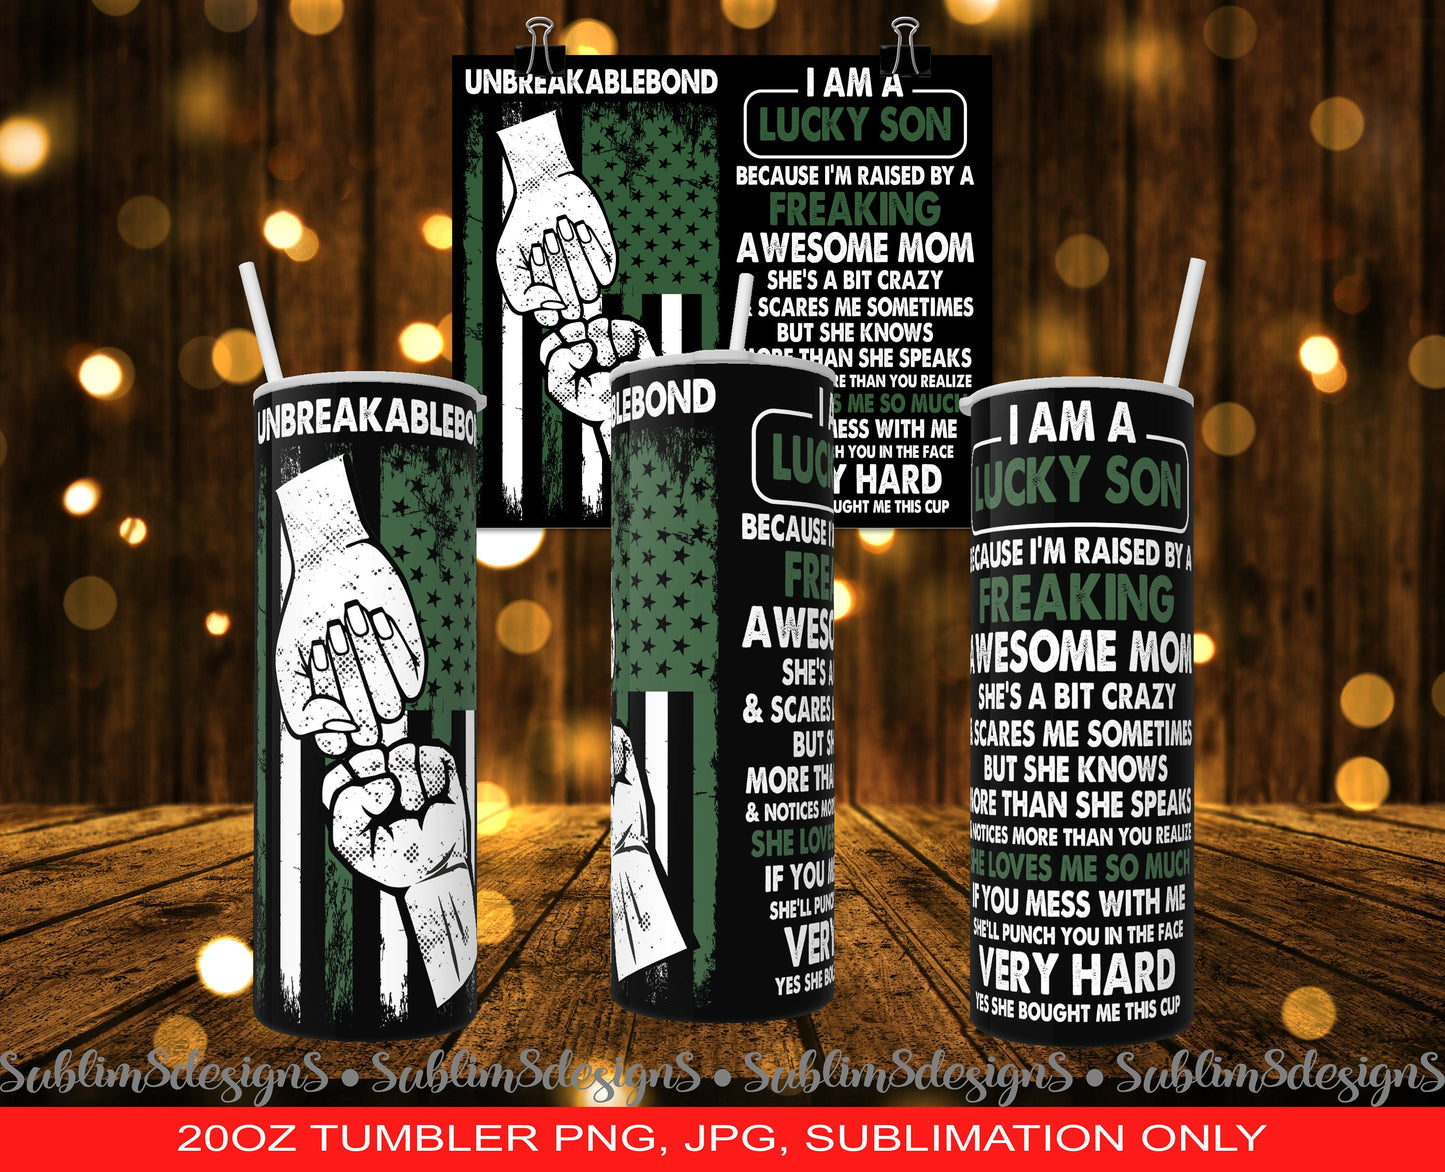 I Am A Lucky Son -  Mother's Day Gift - Perfect for the ultimate momma's boy! - Red And Green 20oz Tumbler Design PNG and JPG ONLY